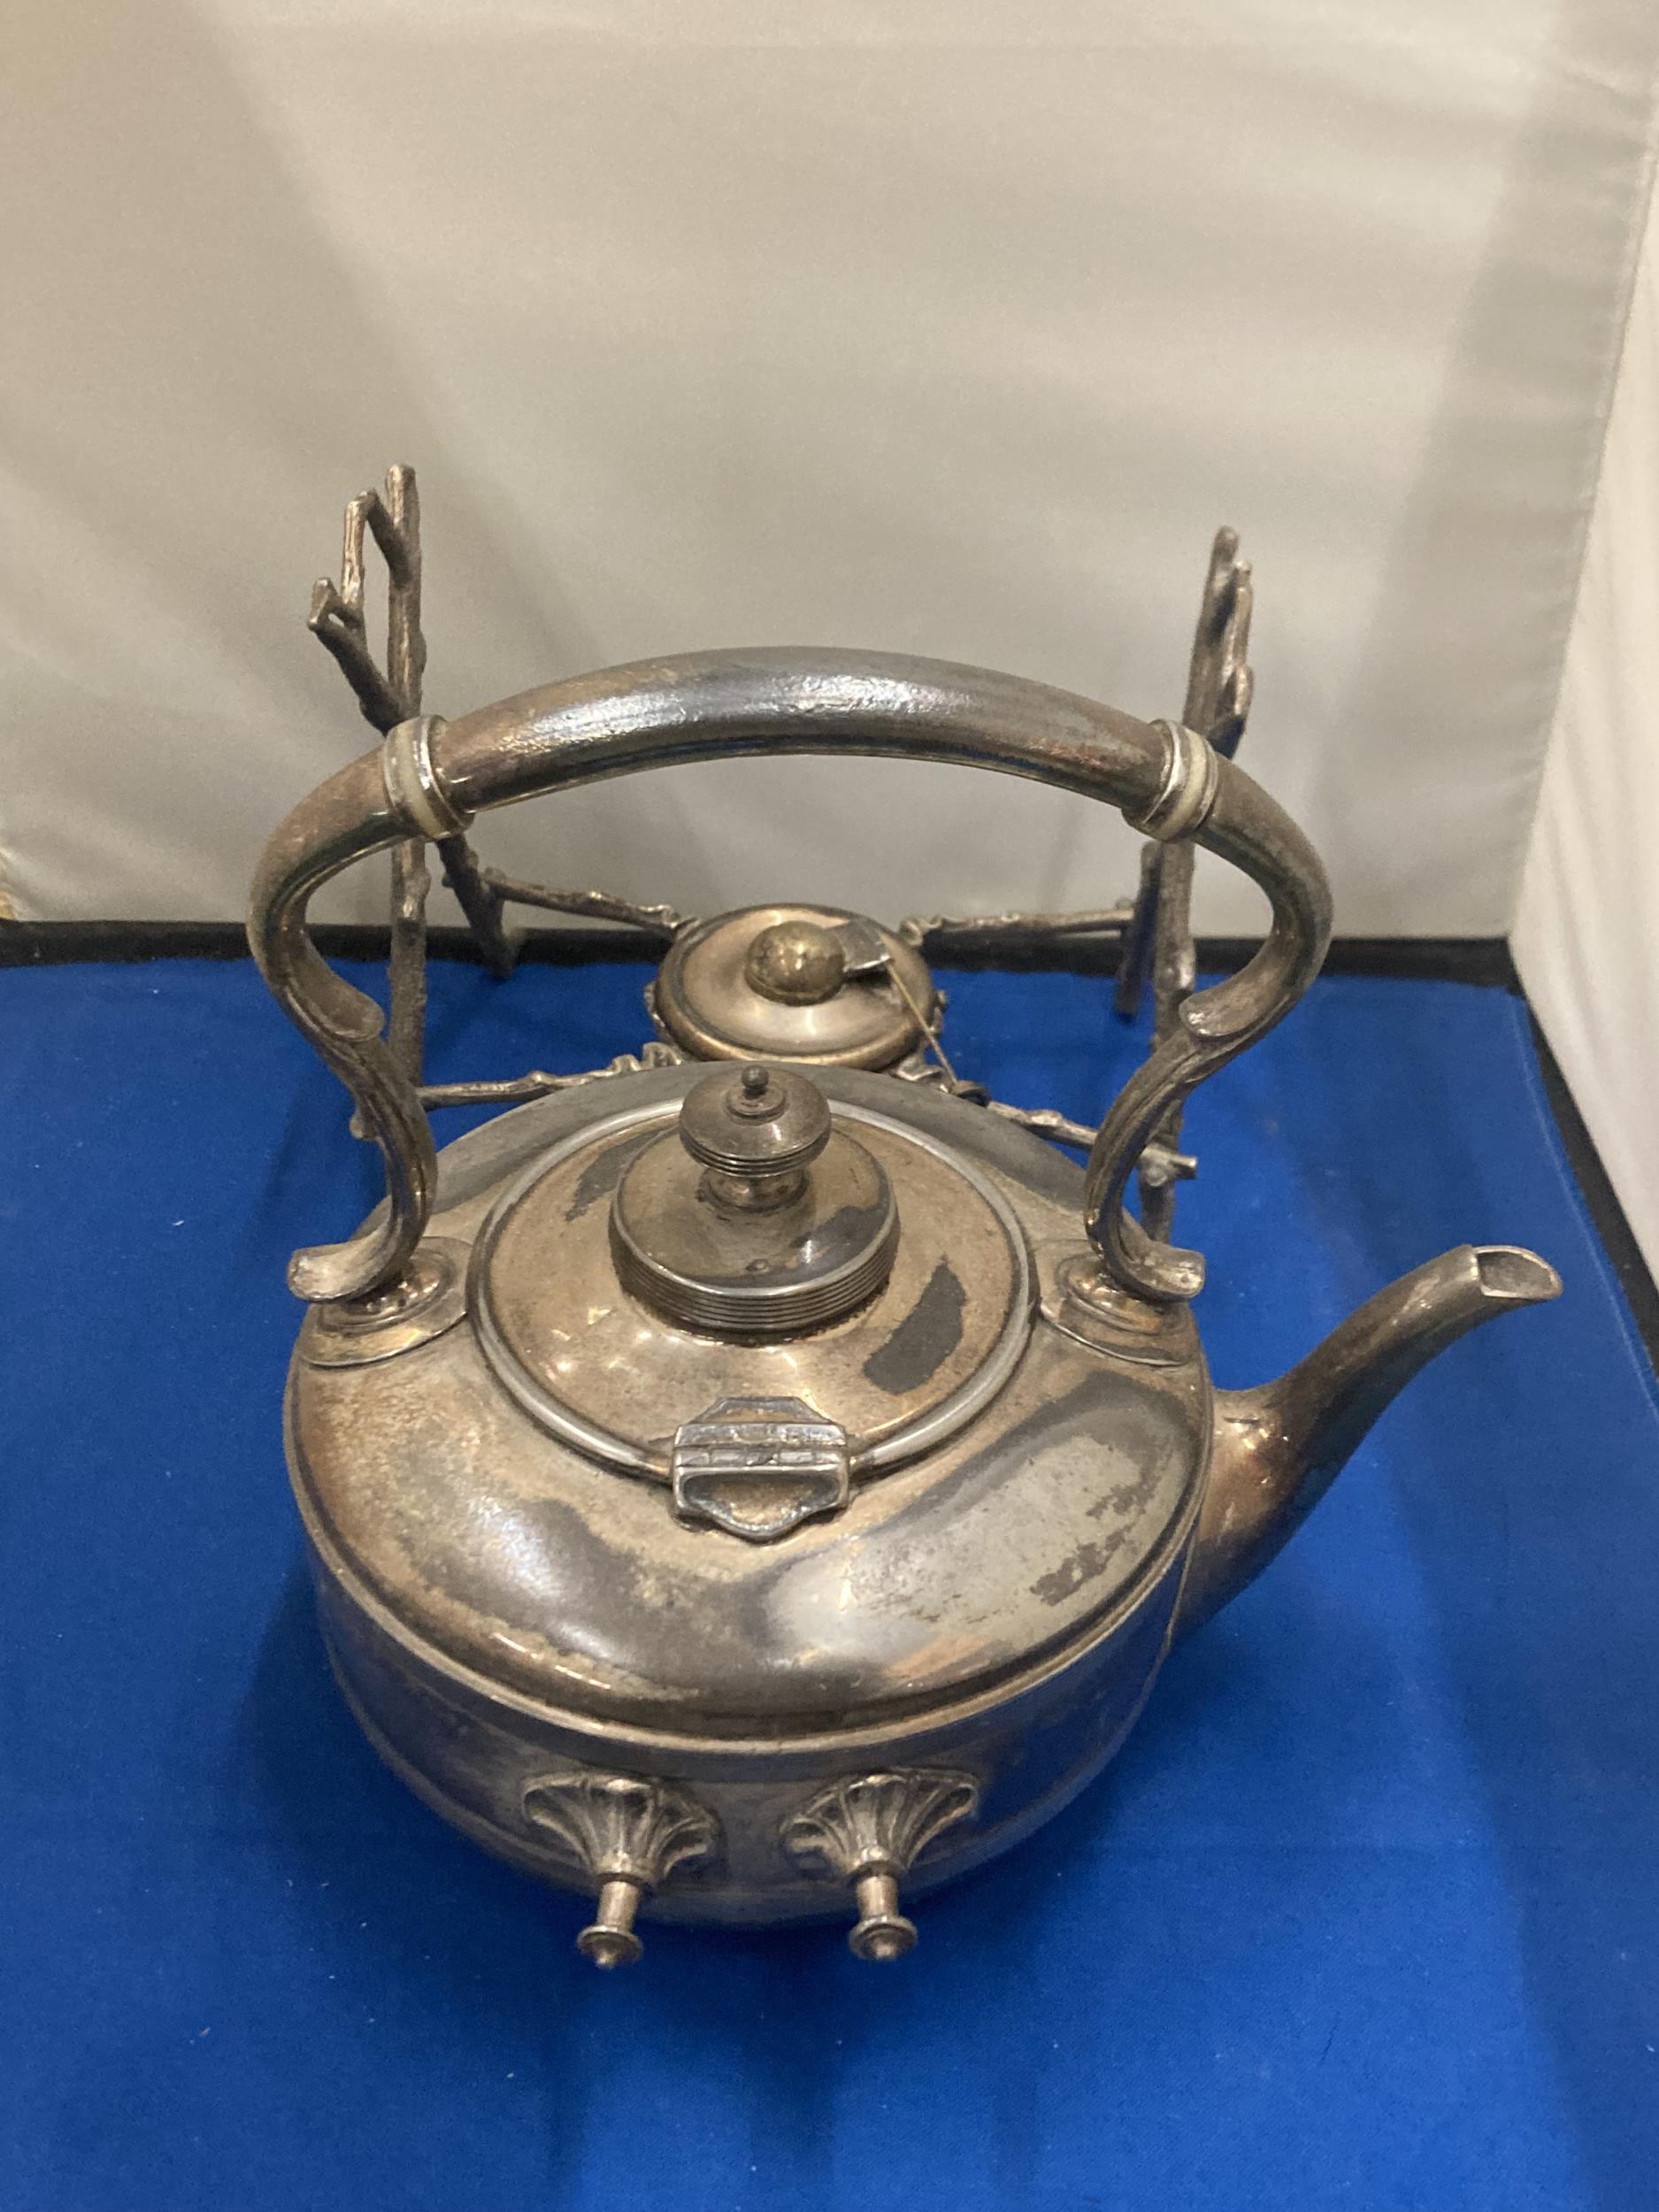 A SILVER PLATED SPIRIT KETTLE WITH FRAME AND BURNER - Image 3 of 4